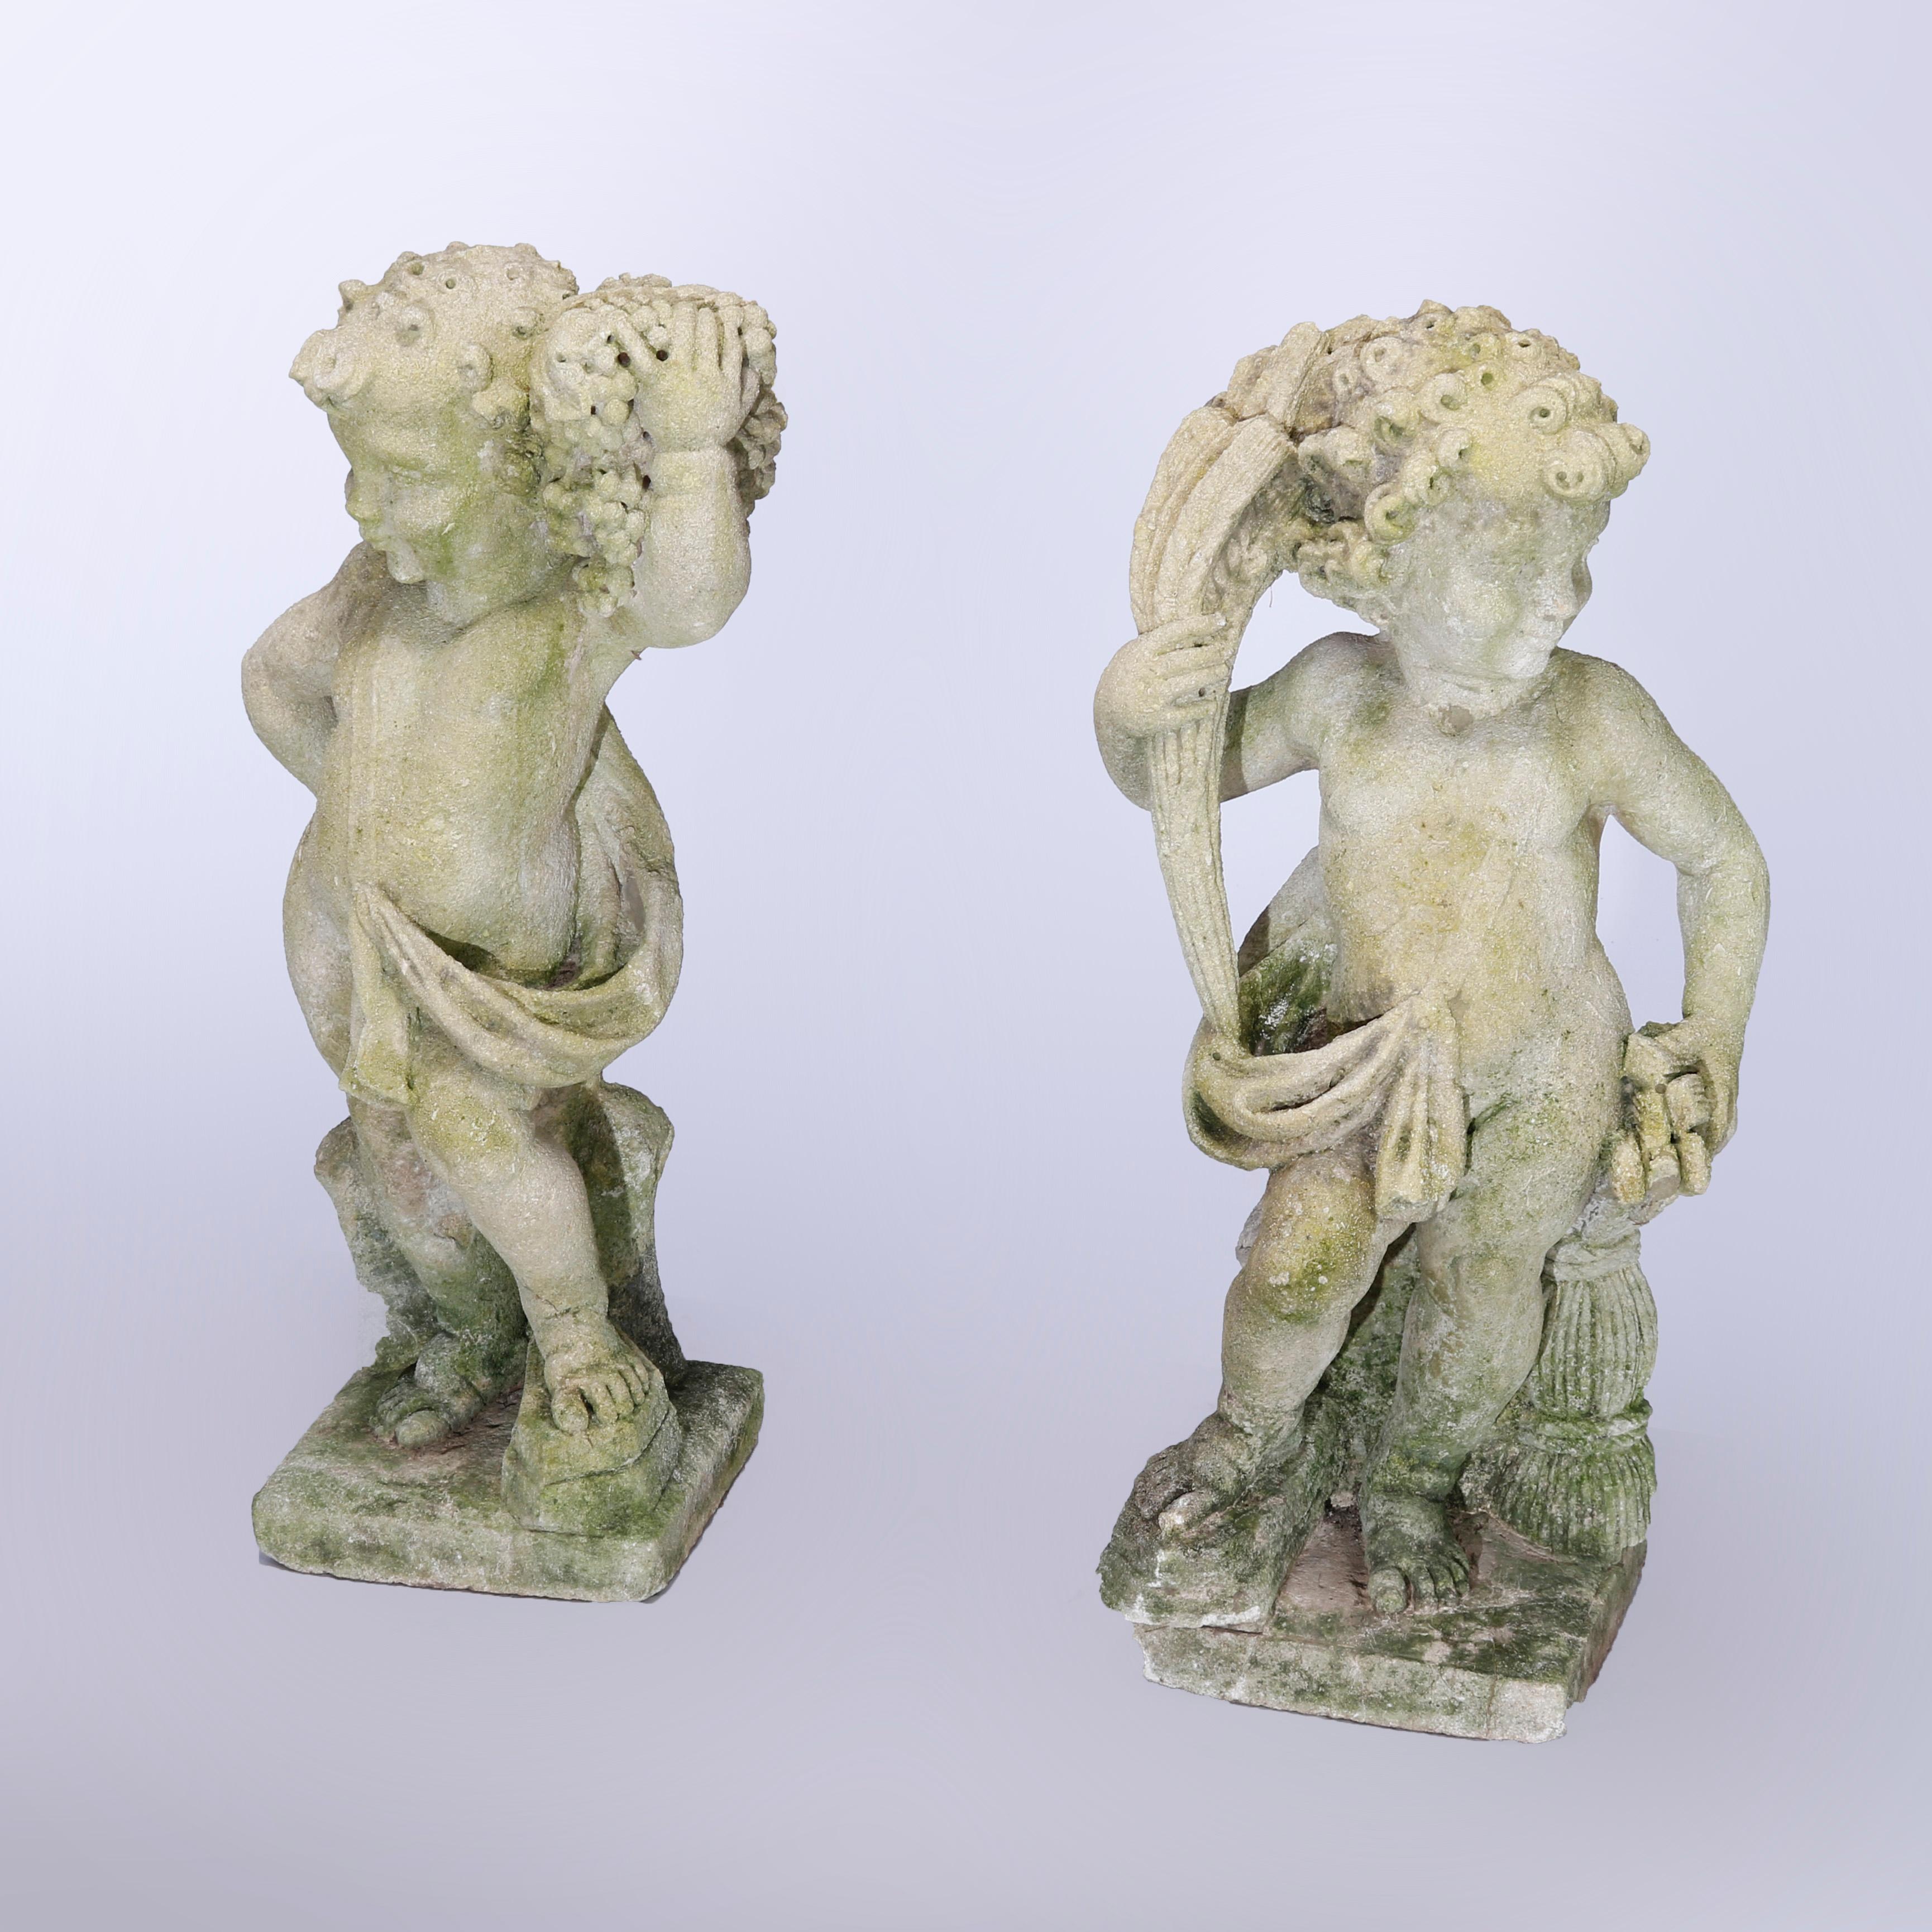 An antique pair of garden statues depict Classical Harvest Cherubs, one with grapes and the other with wheat, c1890

Measures - 29.5''H x 13.75''W x 10''D.